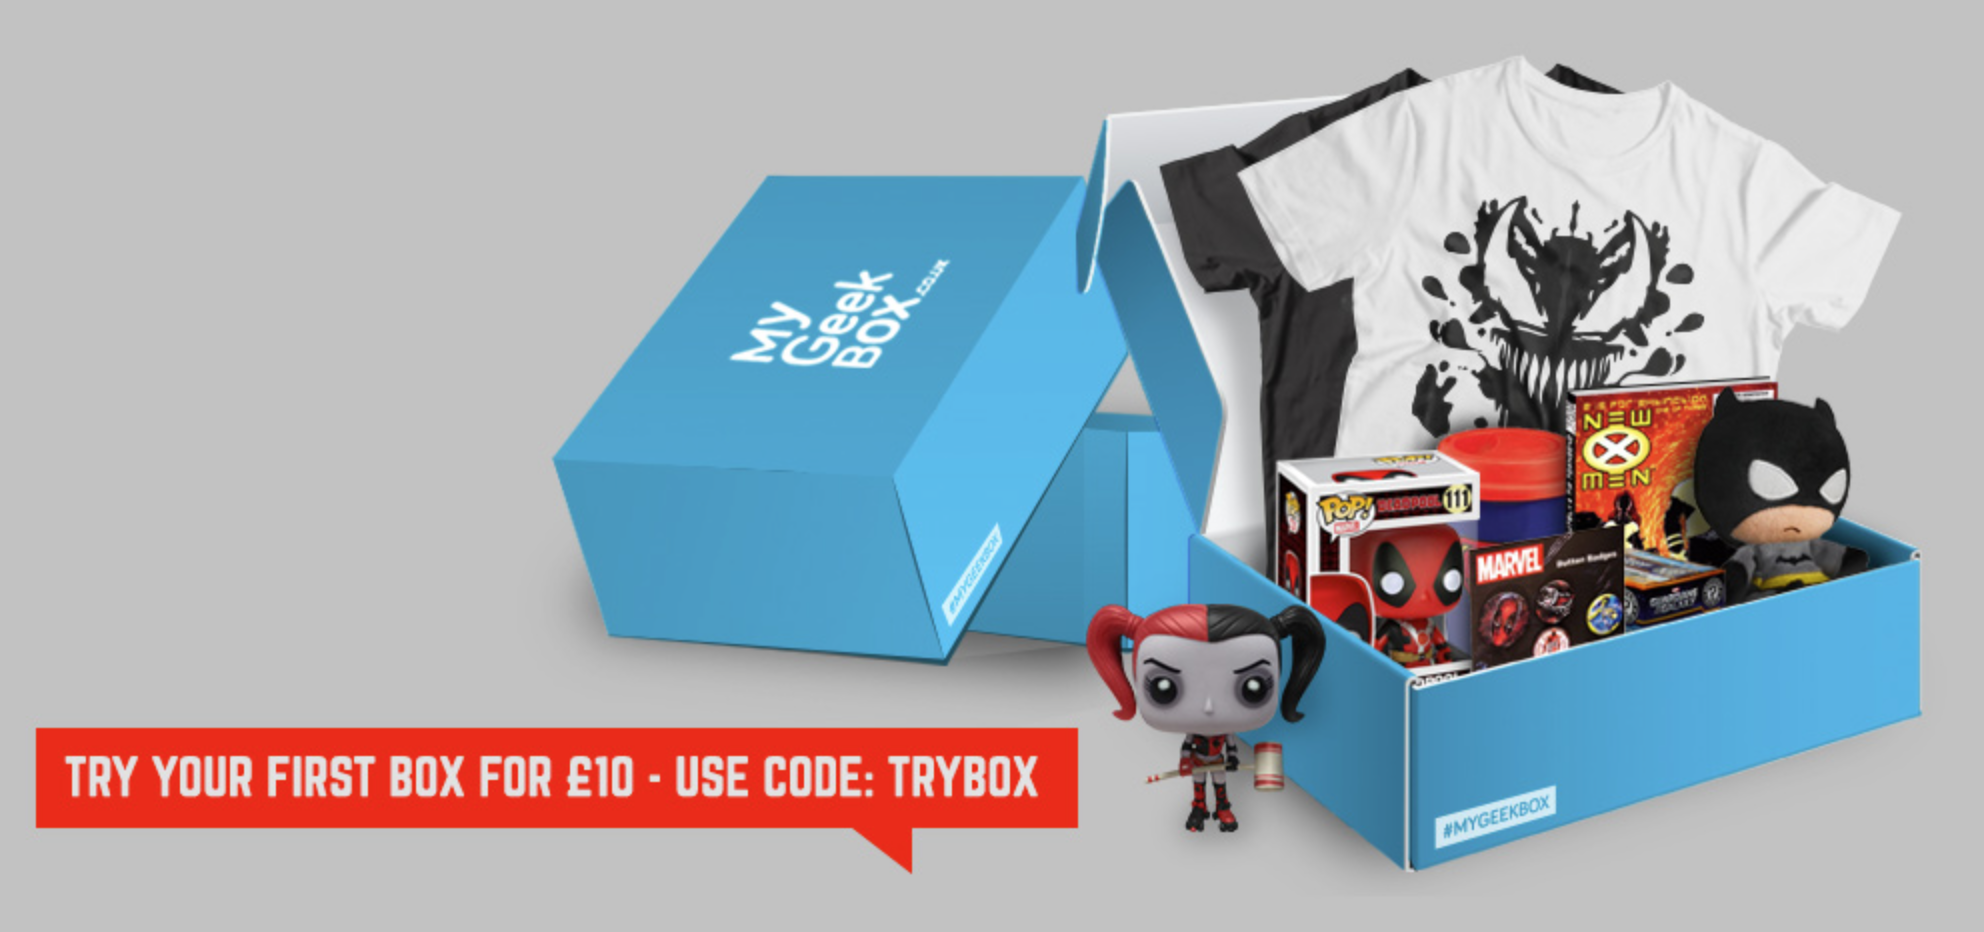 New My Geek Box Coupon Get Your First Box For Under 15! My